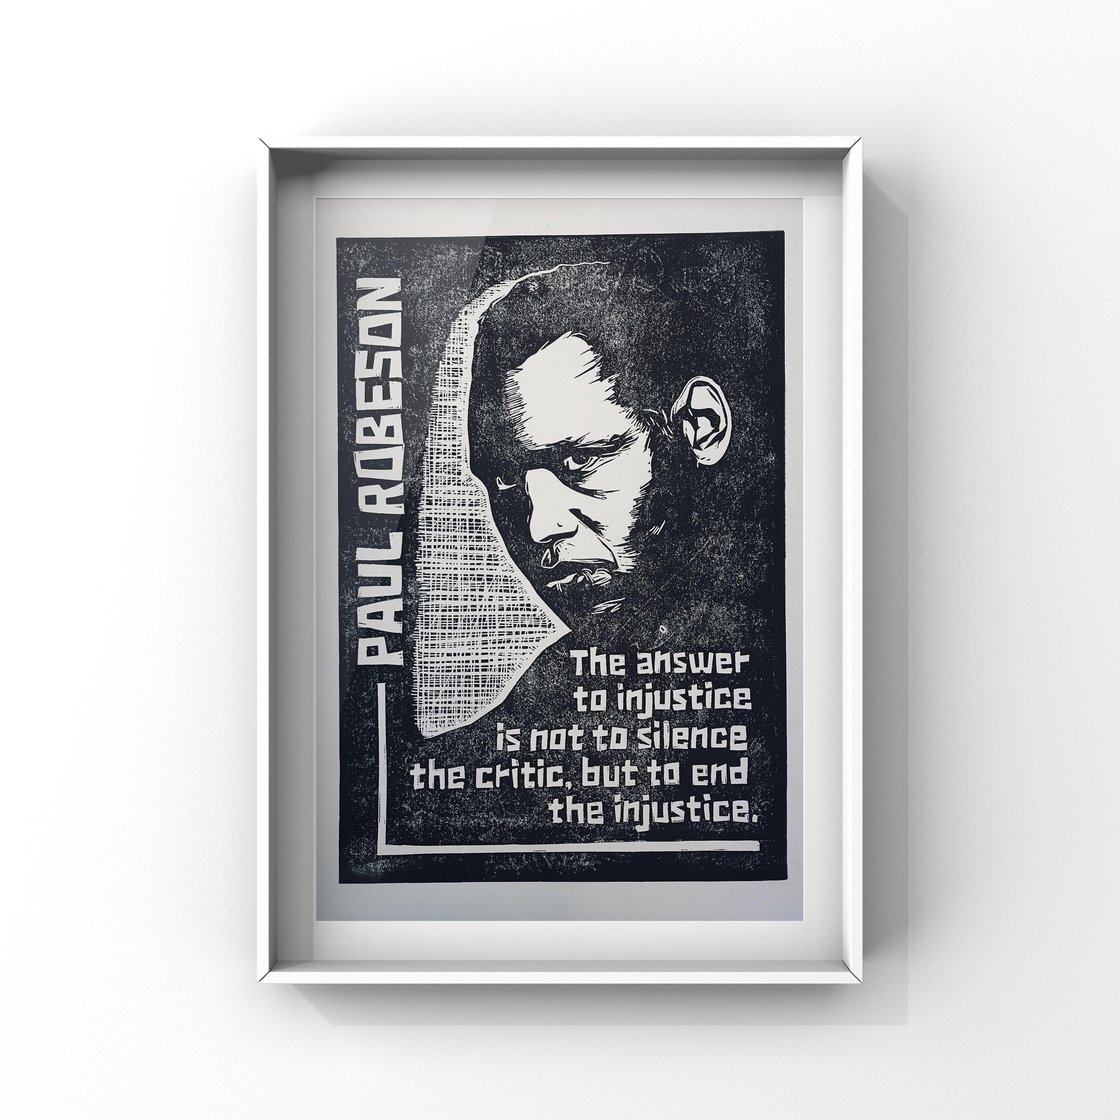 Image of Paul Robeson. Hand Made. Original A4 linocut print. Limited and Signed. Art.